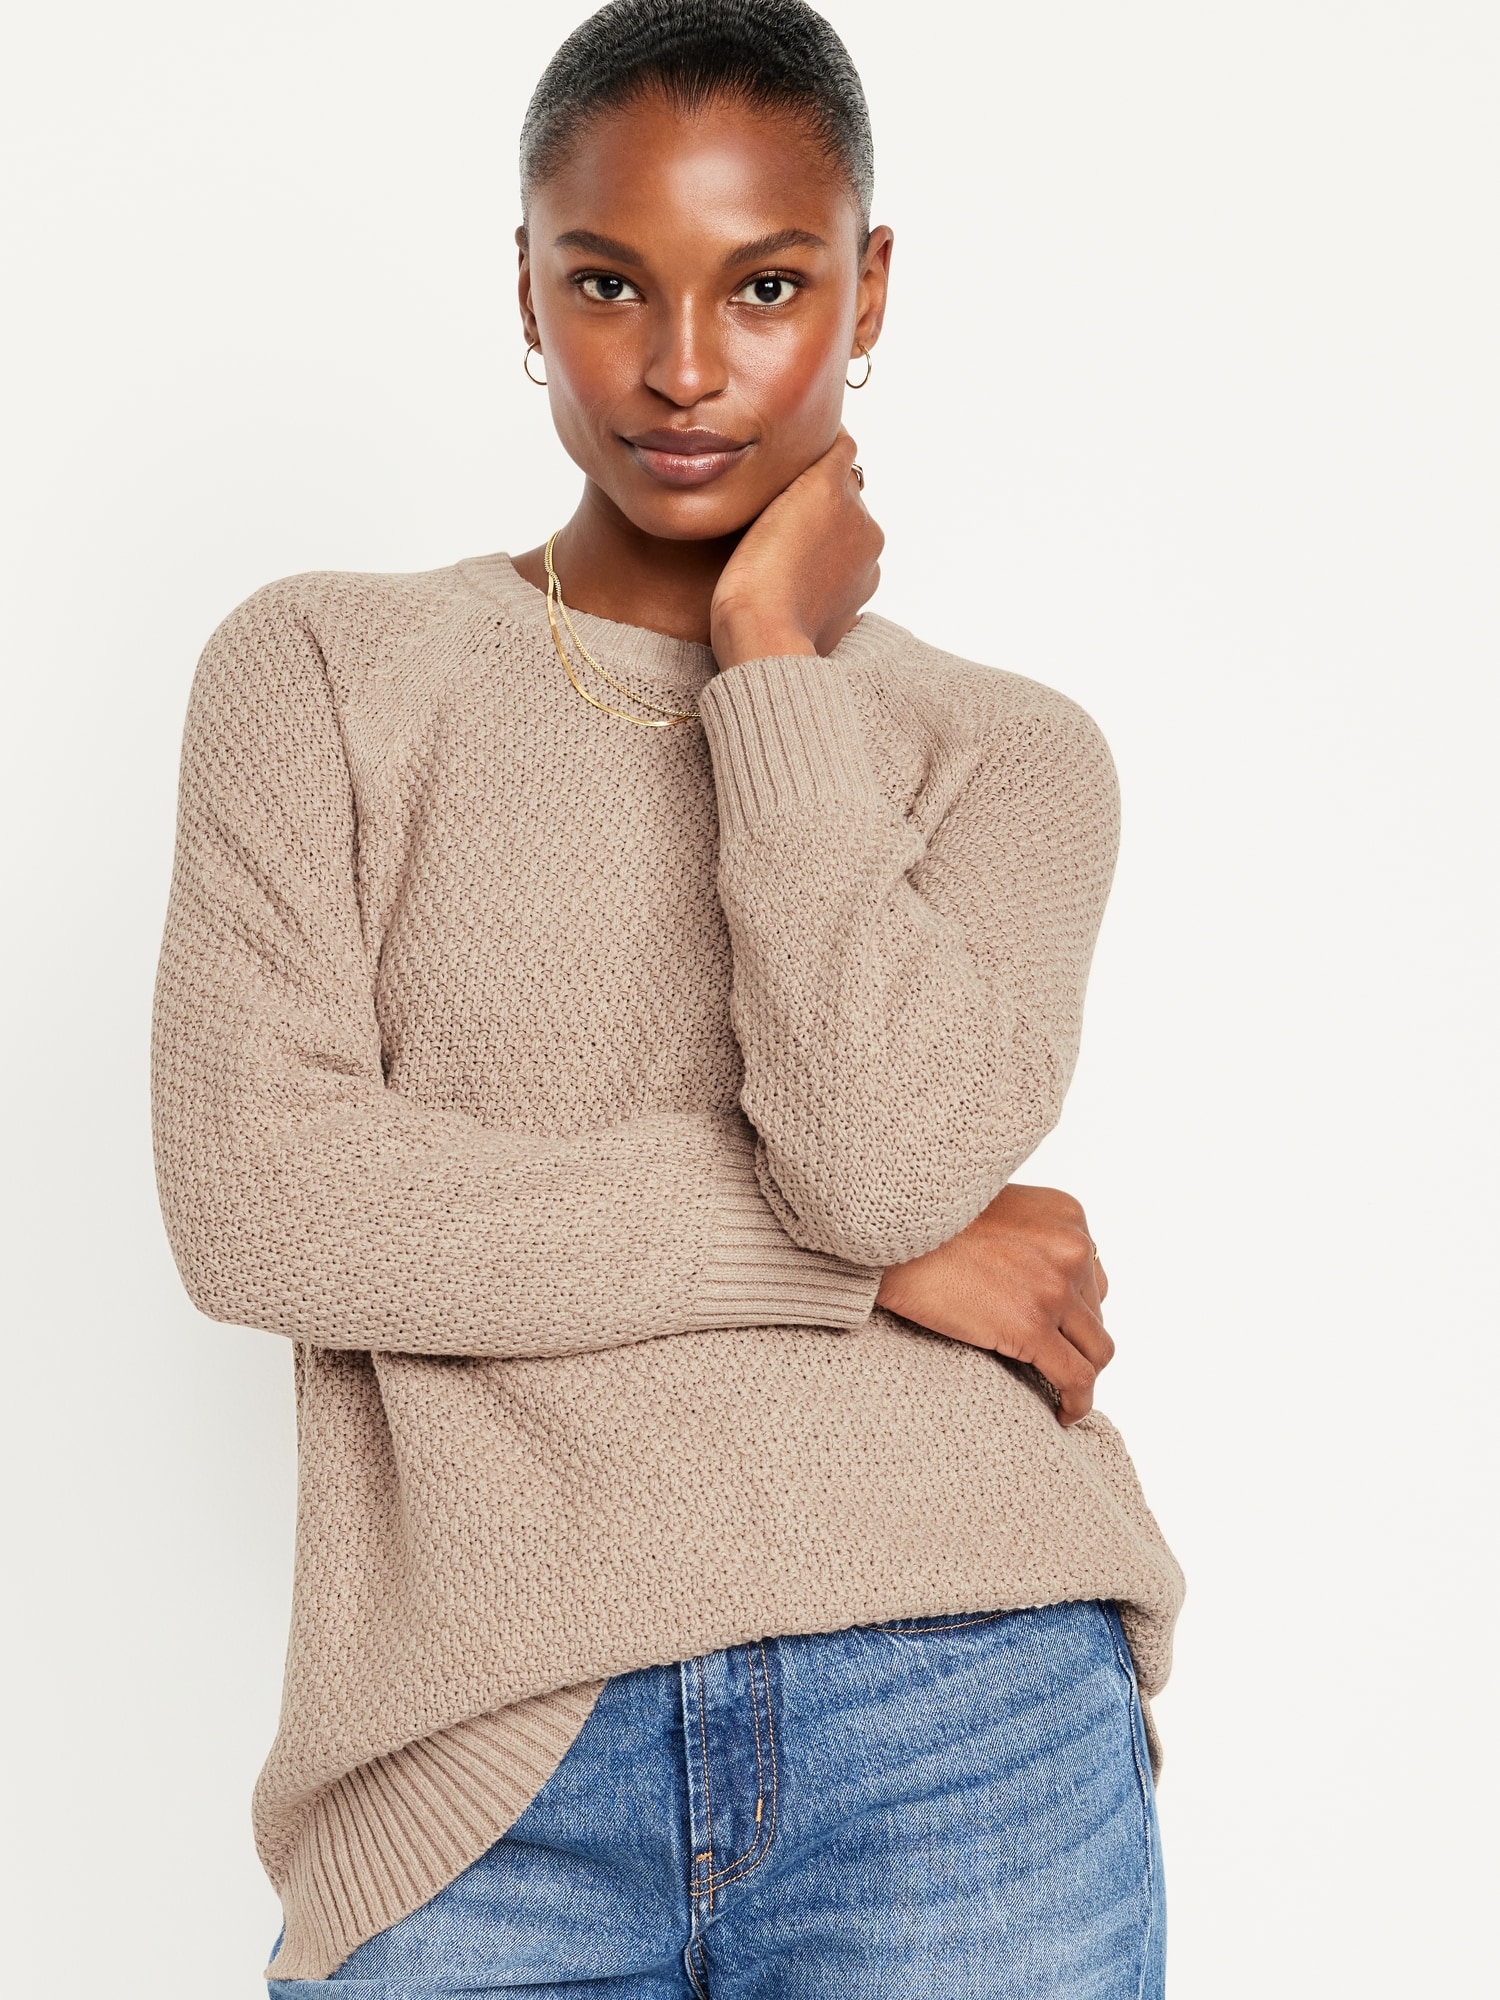 Loose Textured Pullover Tunic Sweater